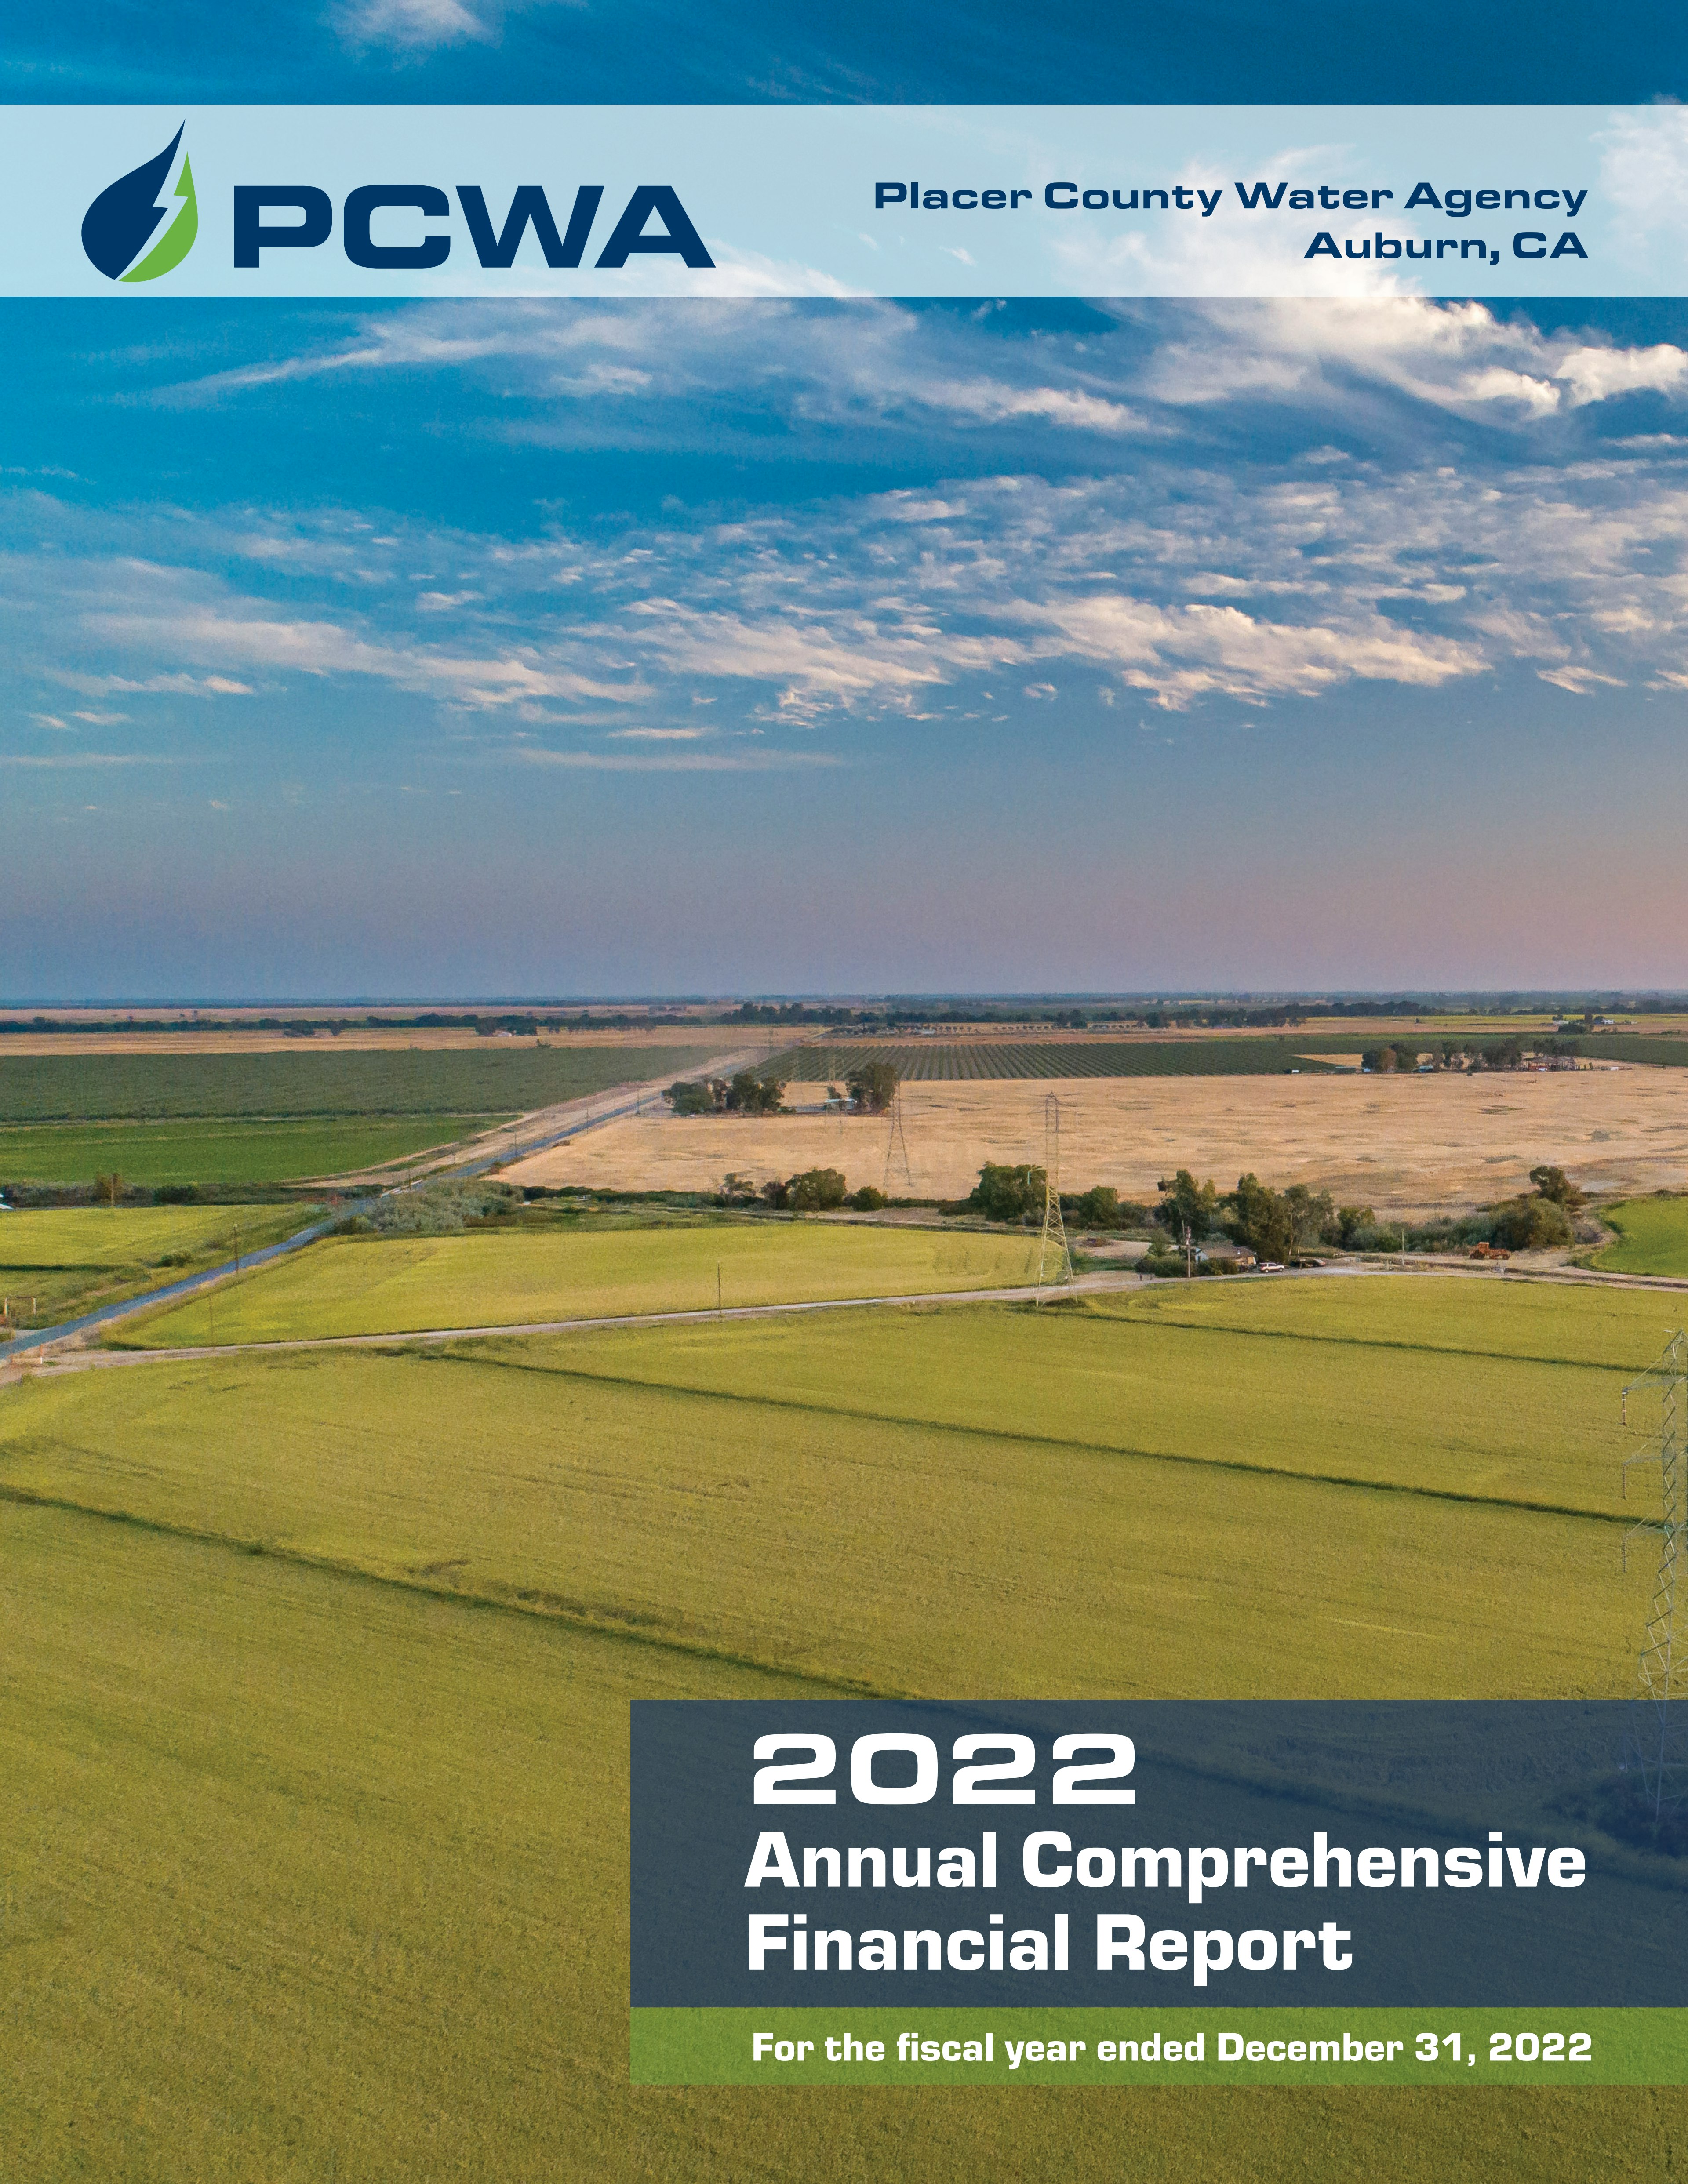 Annual Report Thumbnail and link for 2022 PCWA Annual Report pdf